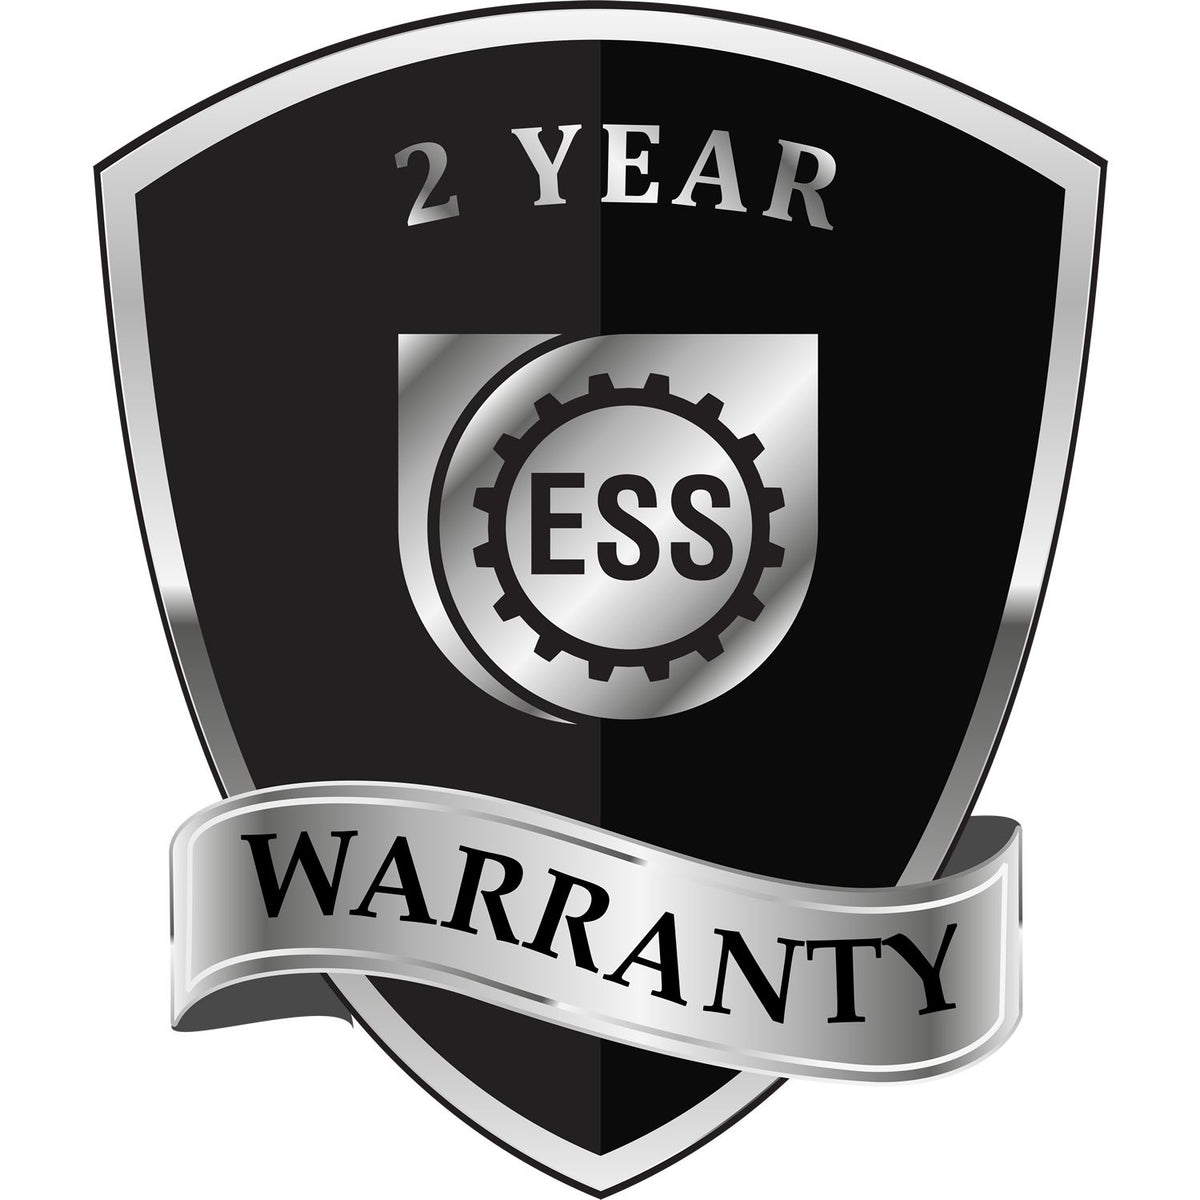 A black and silver badge or emblem showing warranty information for the Hybrid Idaho Architect Seal